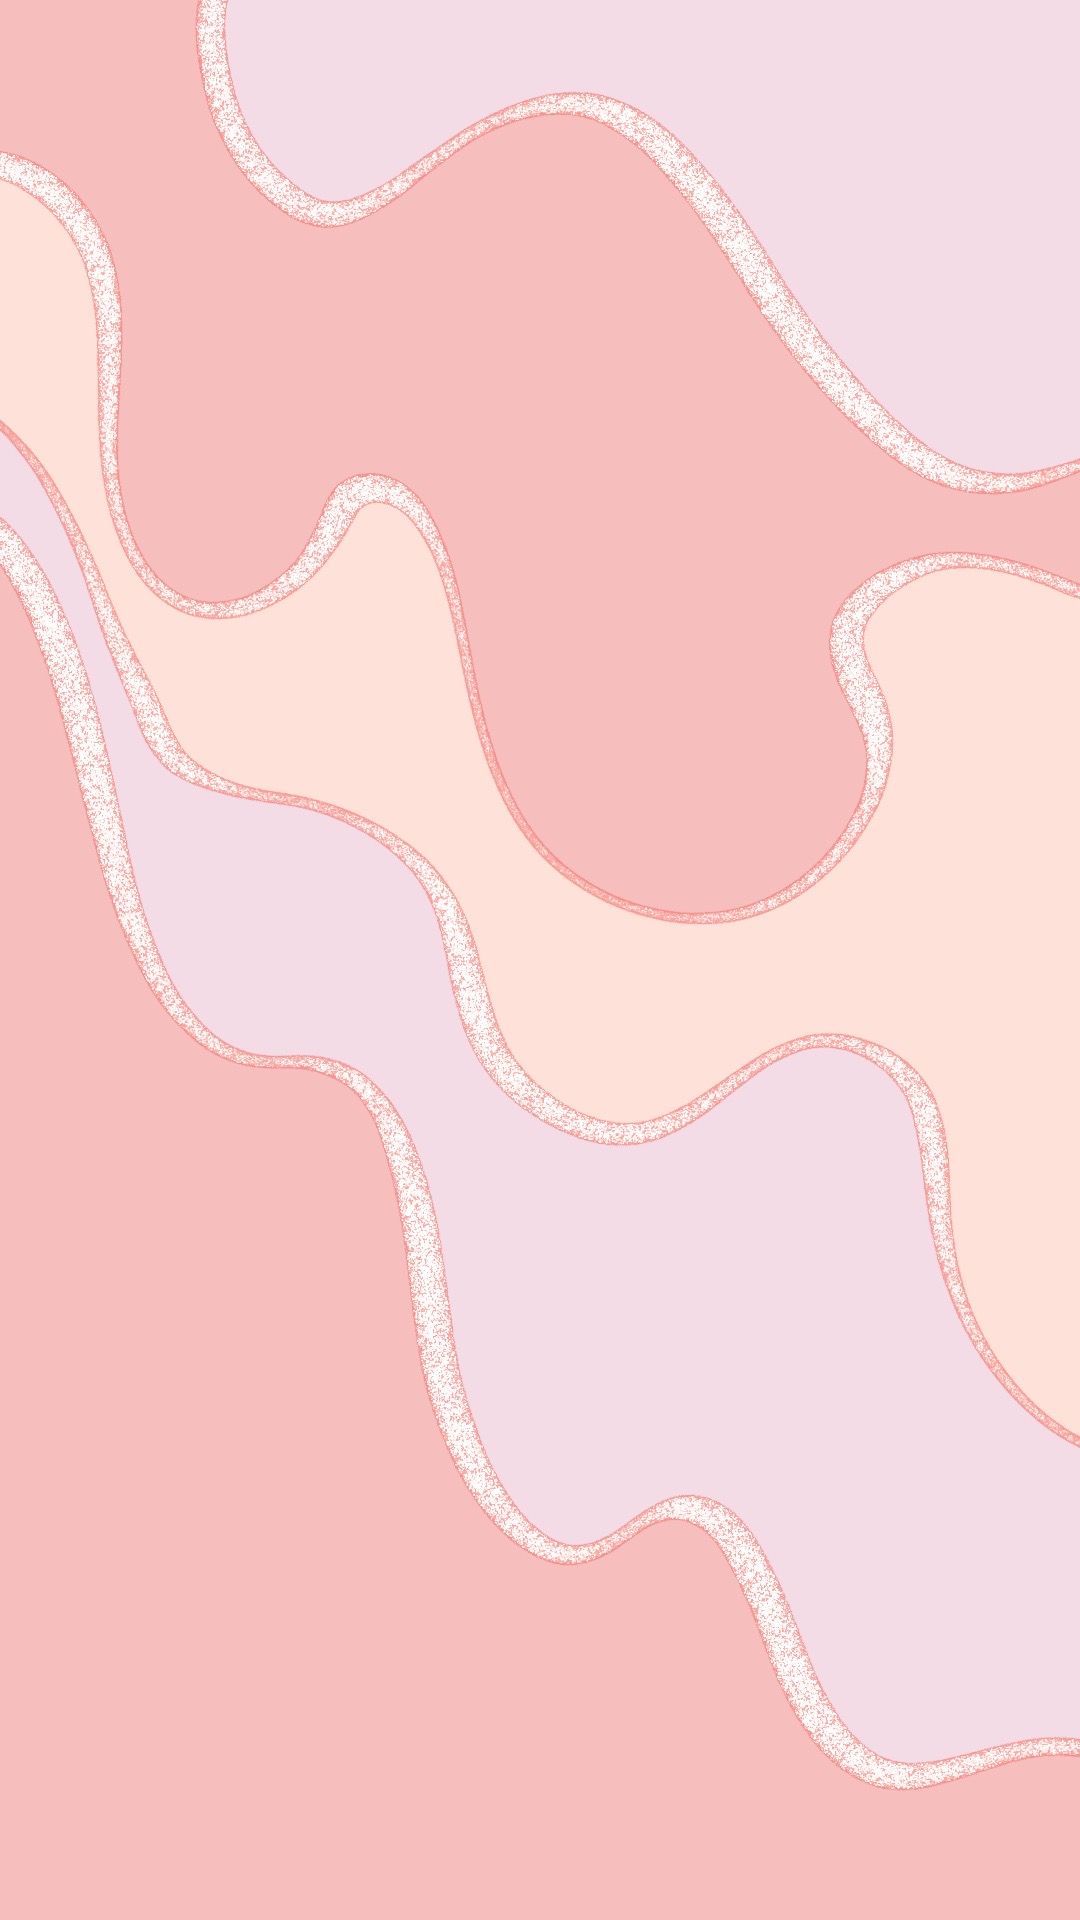 Girly phone wallpaper with abstract shapes - Blush